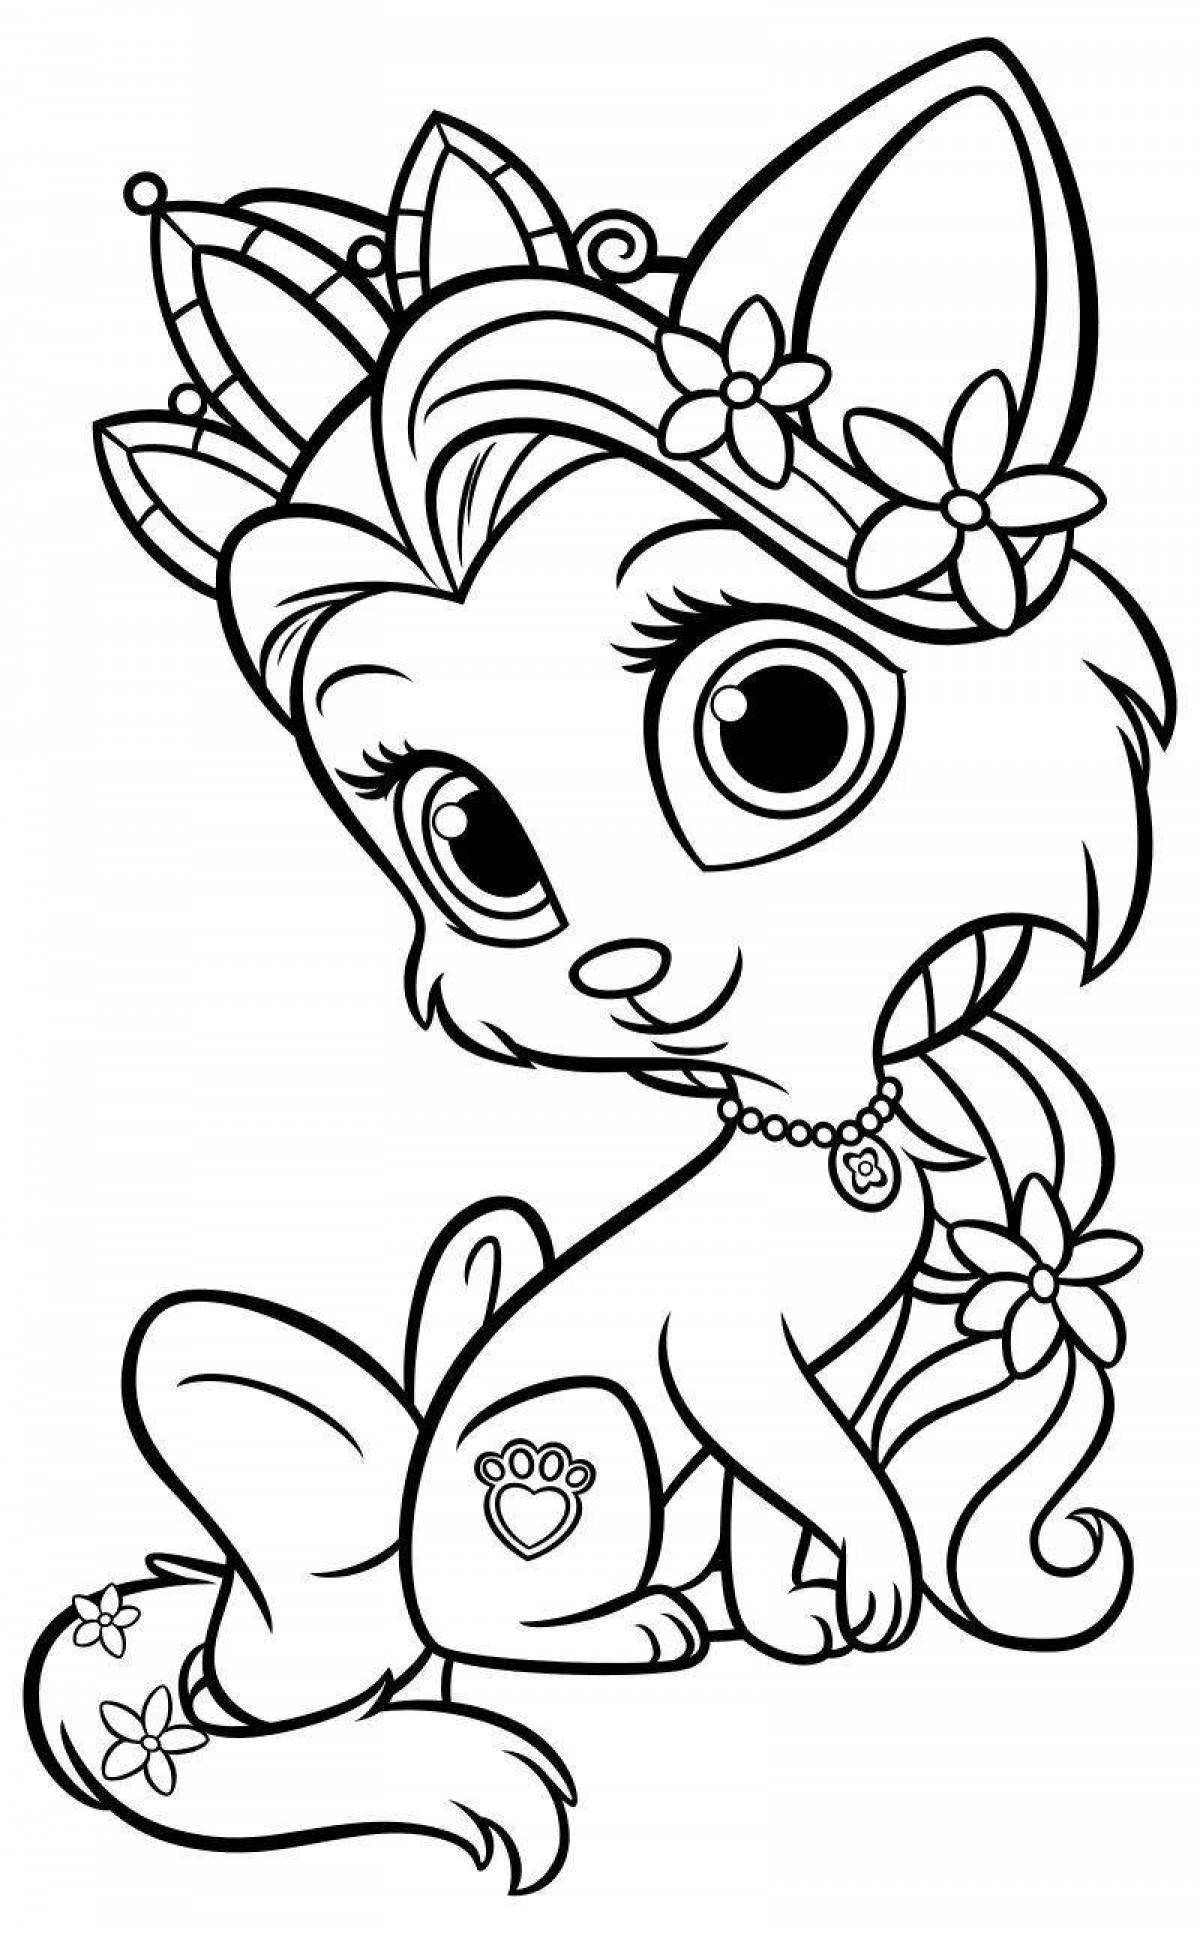 A fun coloring book for girls with animals